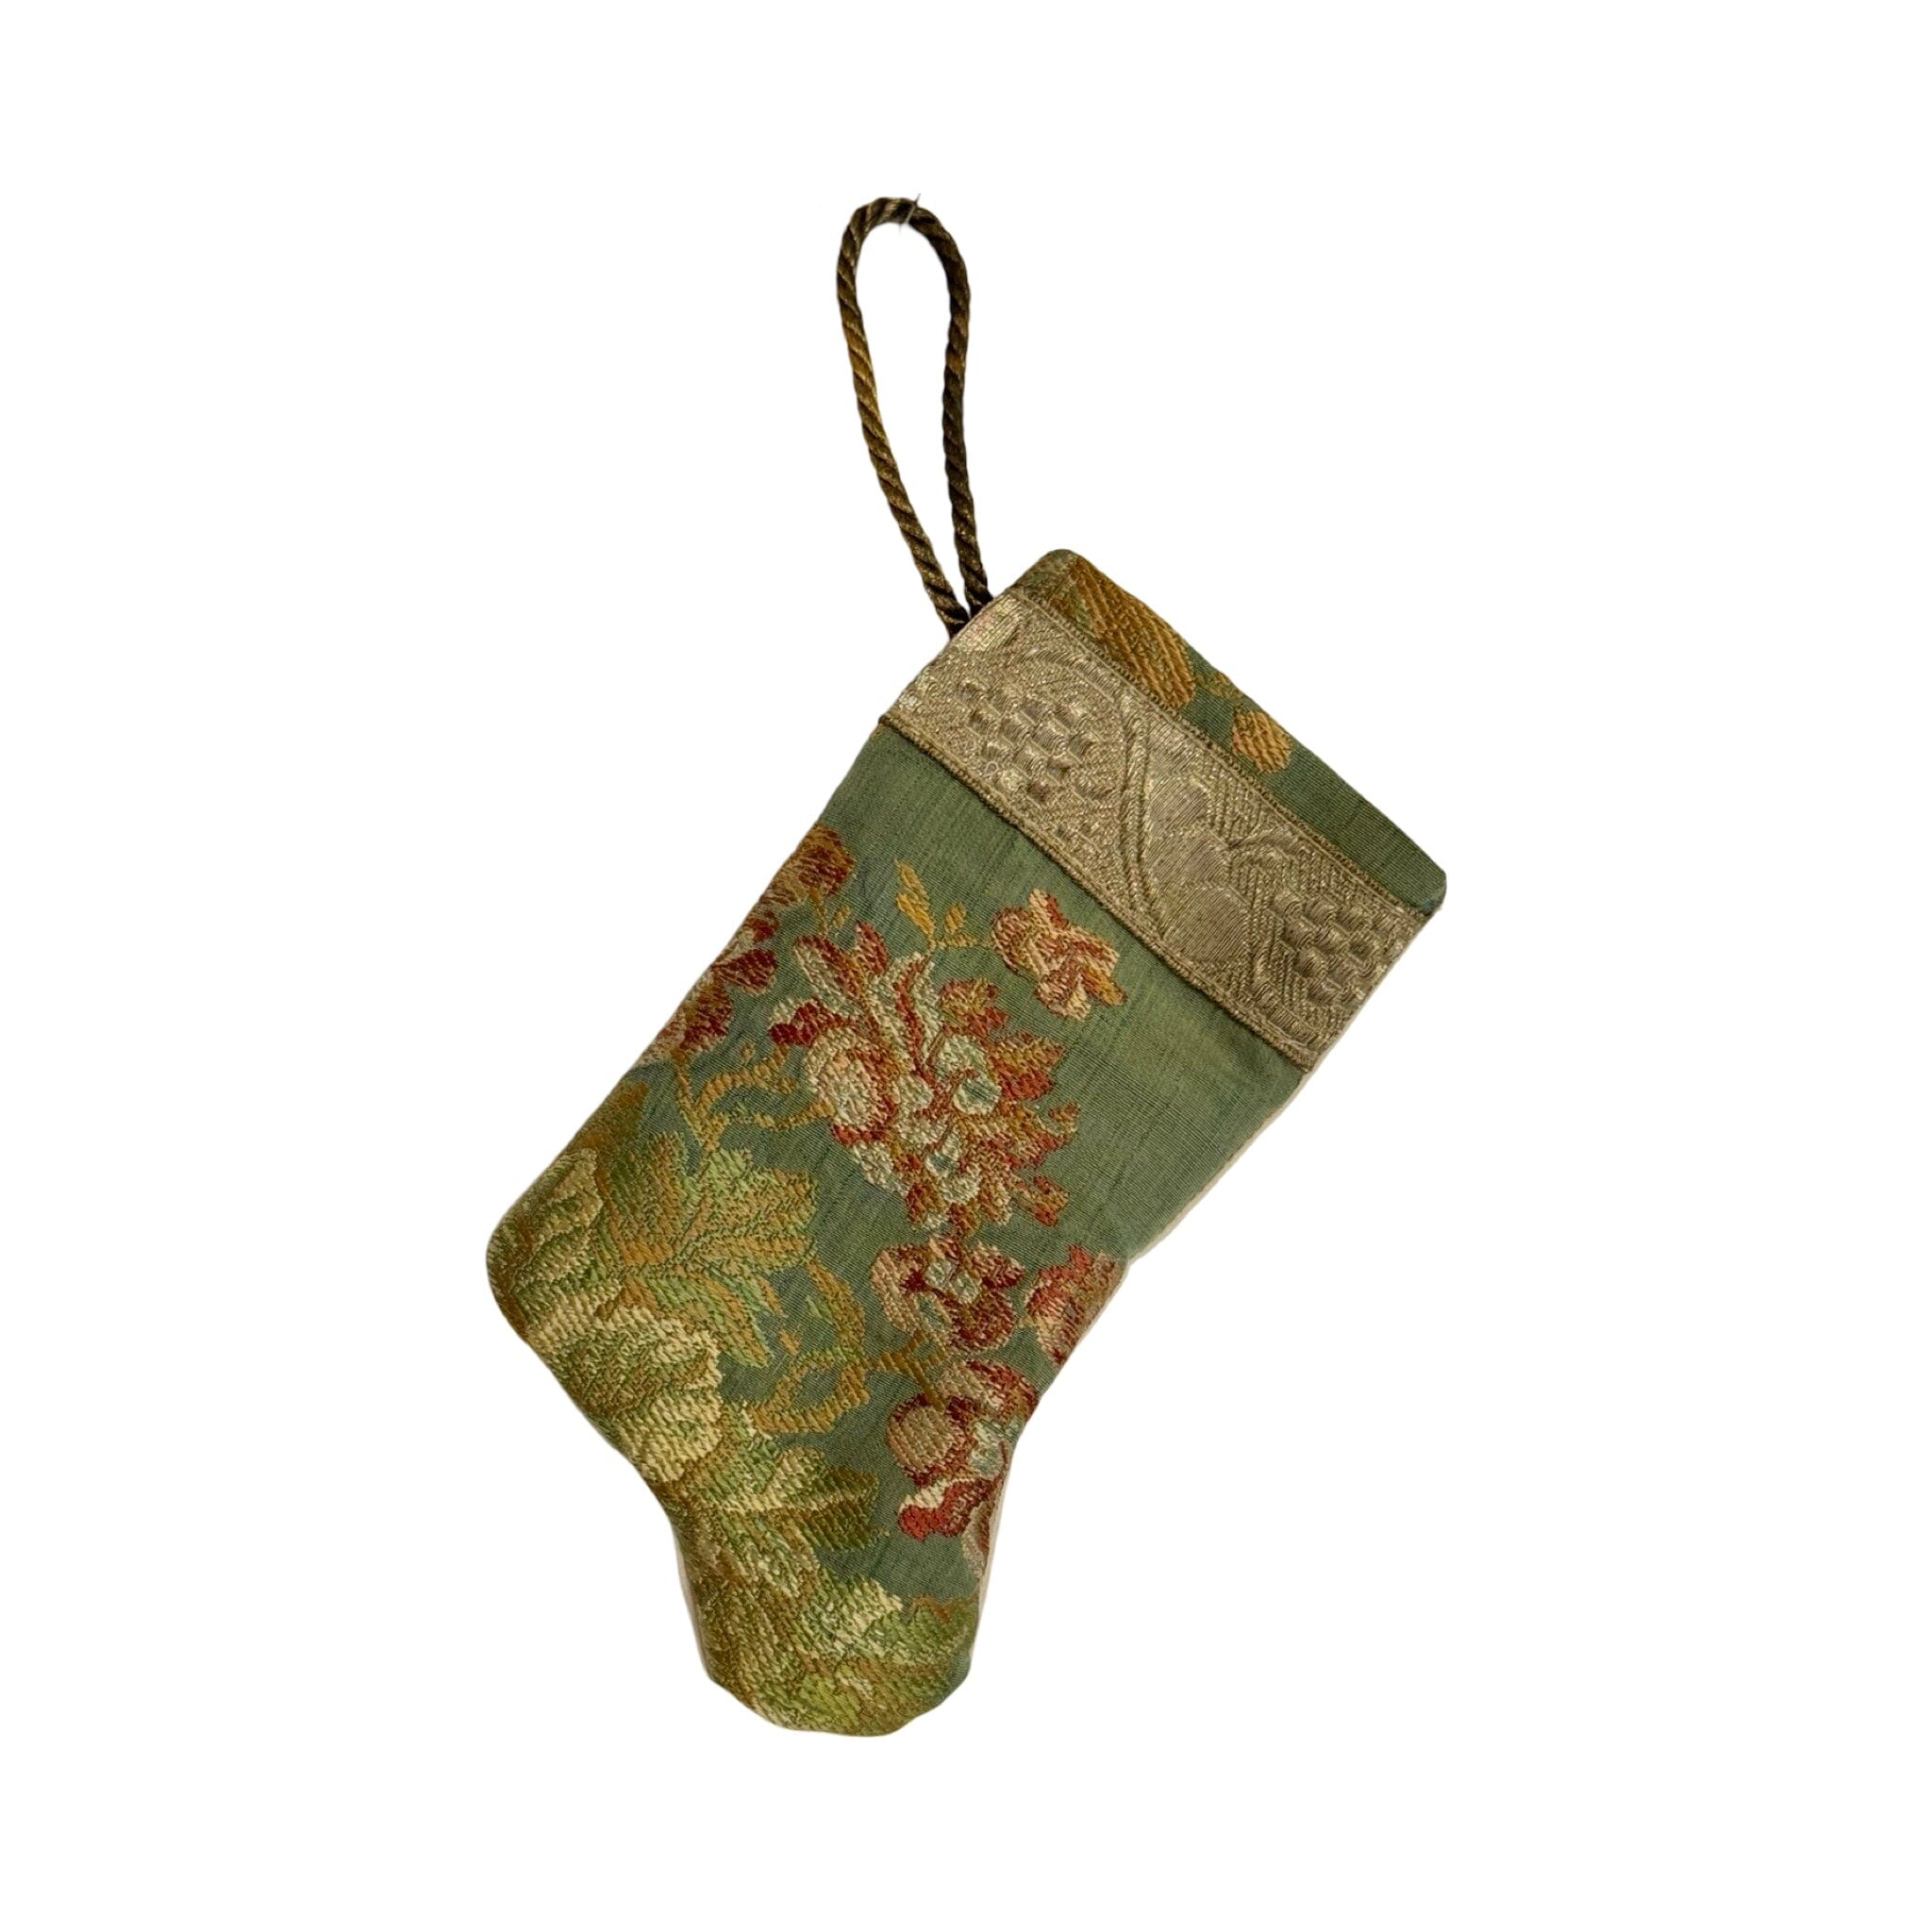 Handmade Mini Stocking Made From Vintage Fabric and Trims- Green Floral Ornament B. Viz Design L 